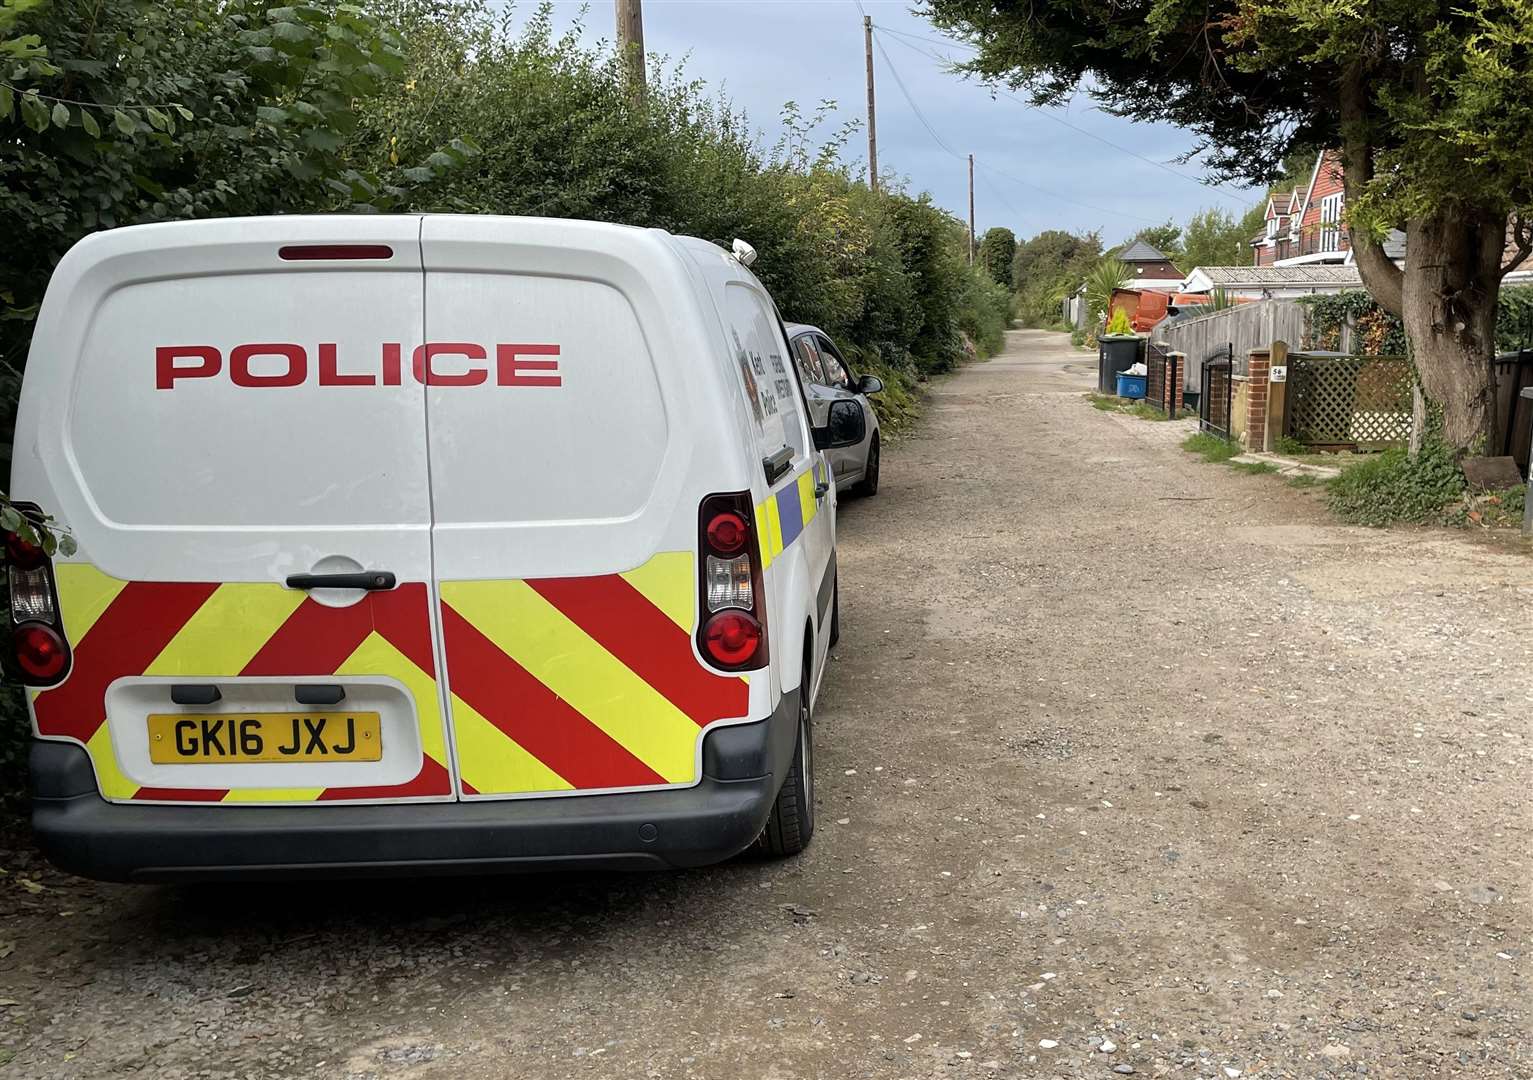 Forensic officers were called to the property in West Malling